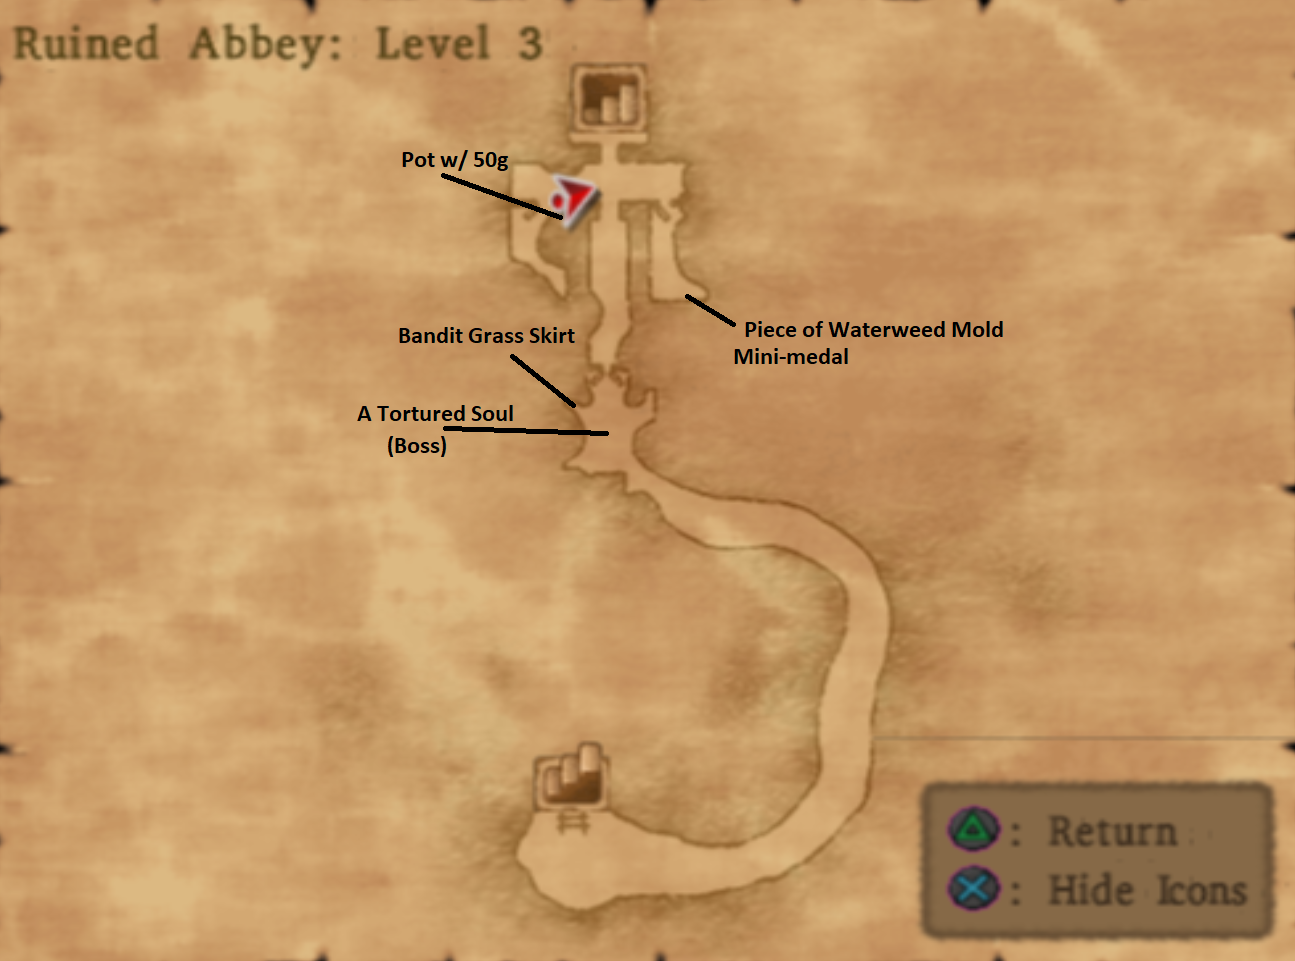 Ruined Abbey Level 3